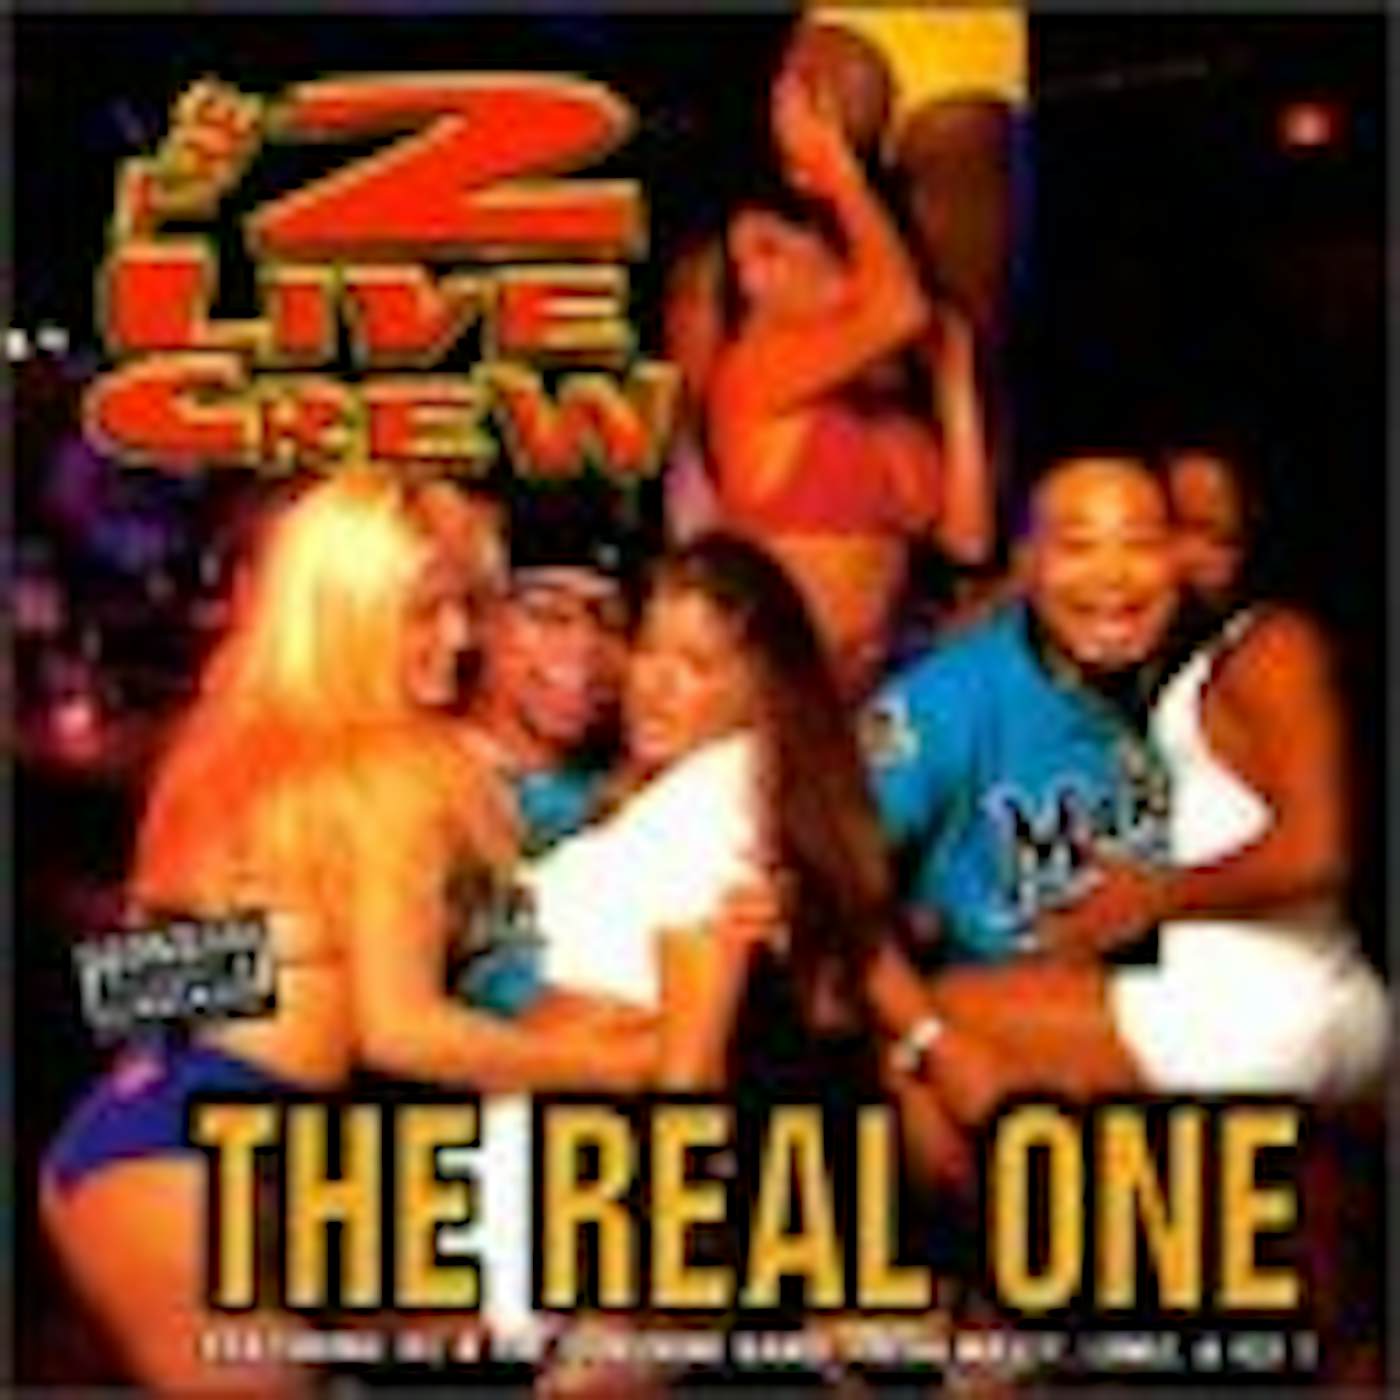 2 LIVE CREW REAL ONE CD